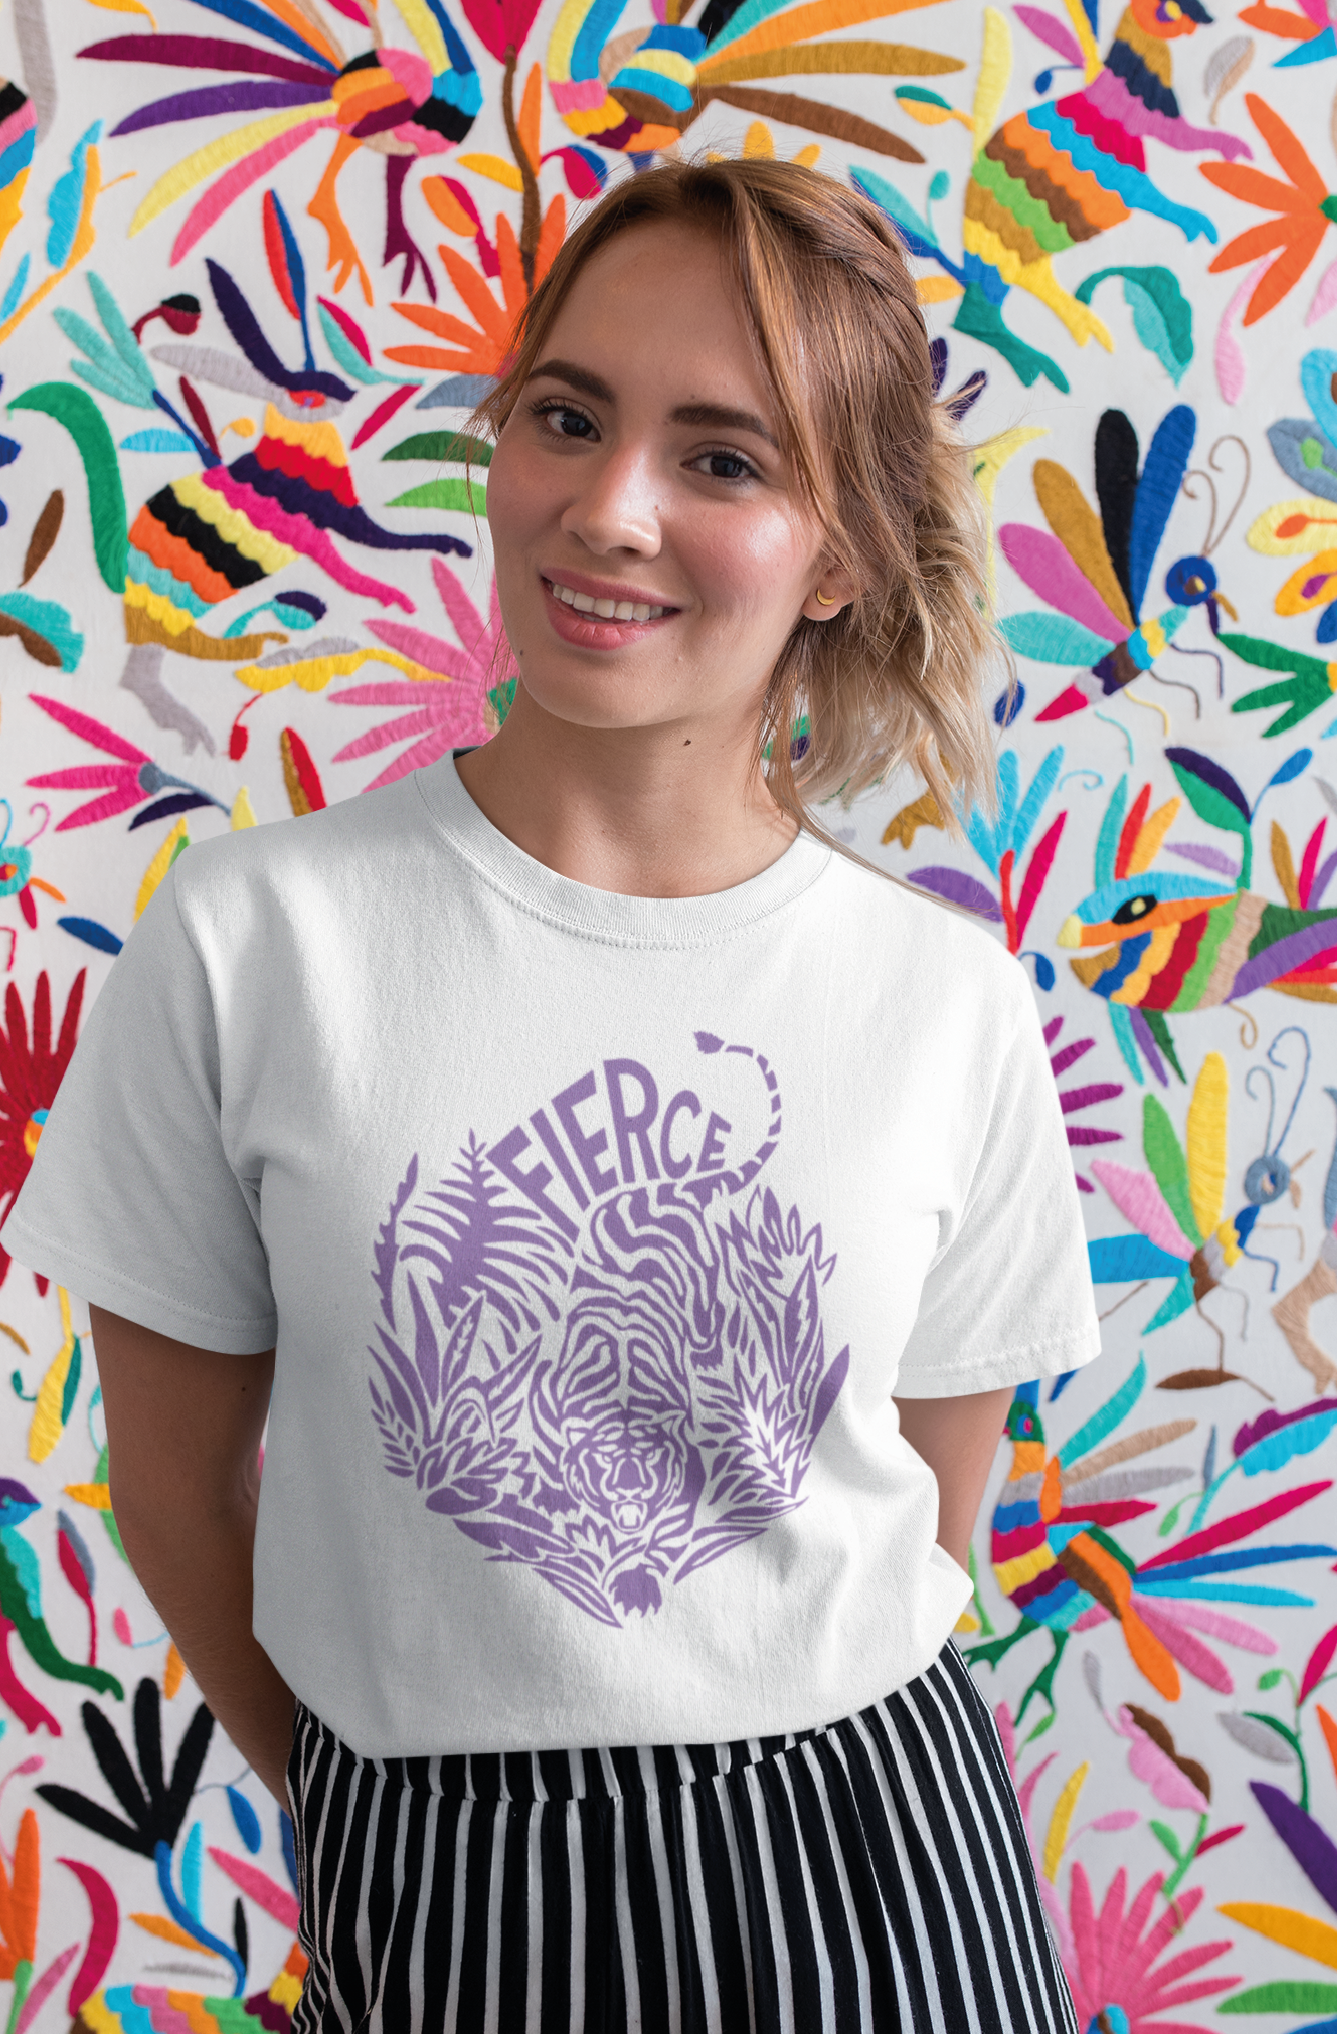 Woman standing in front of a patterned and colorful backdrop smiles while wearing a white tshirt with a Braver Tiger print in lavendar